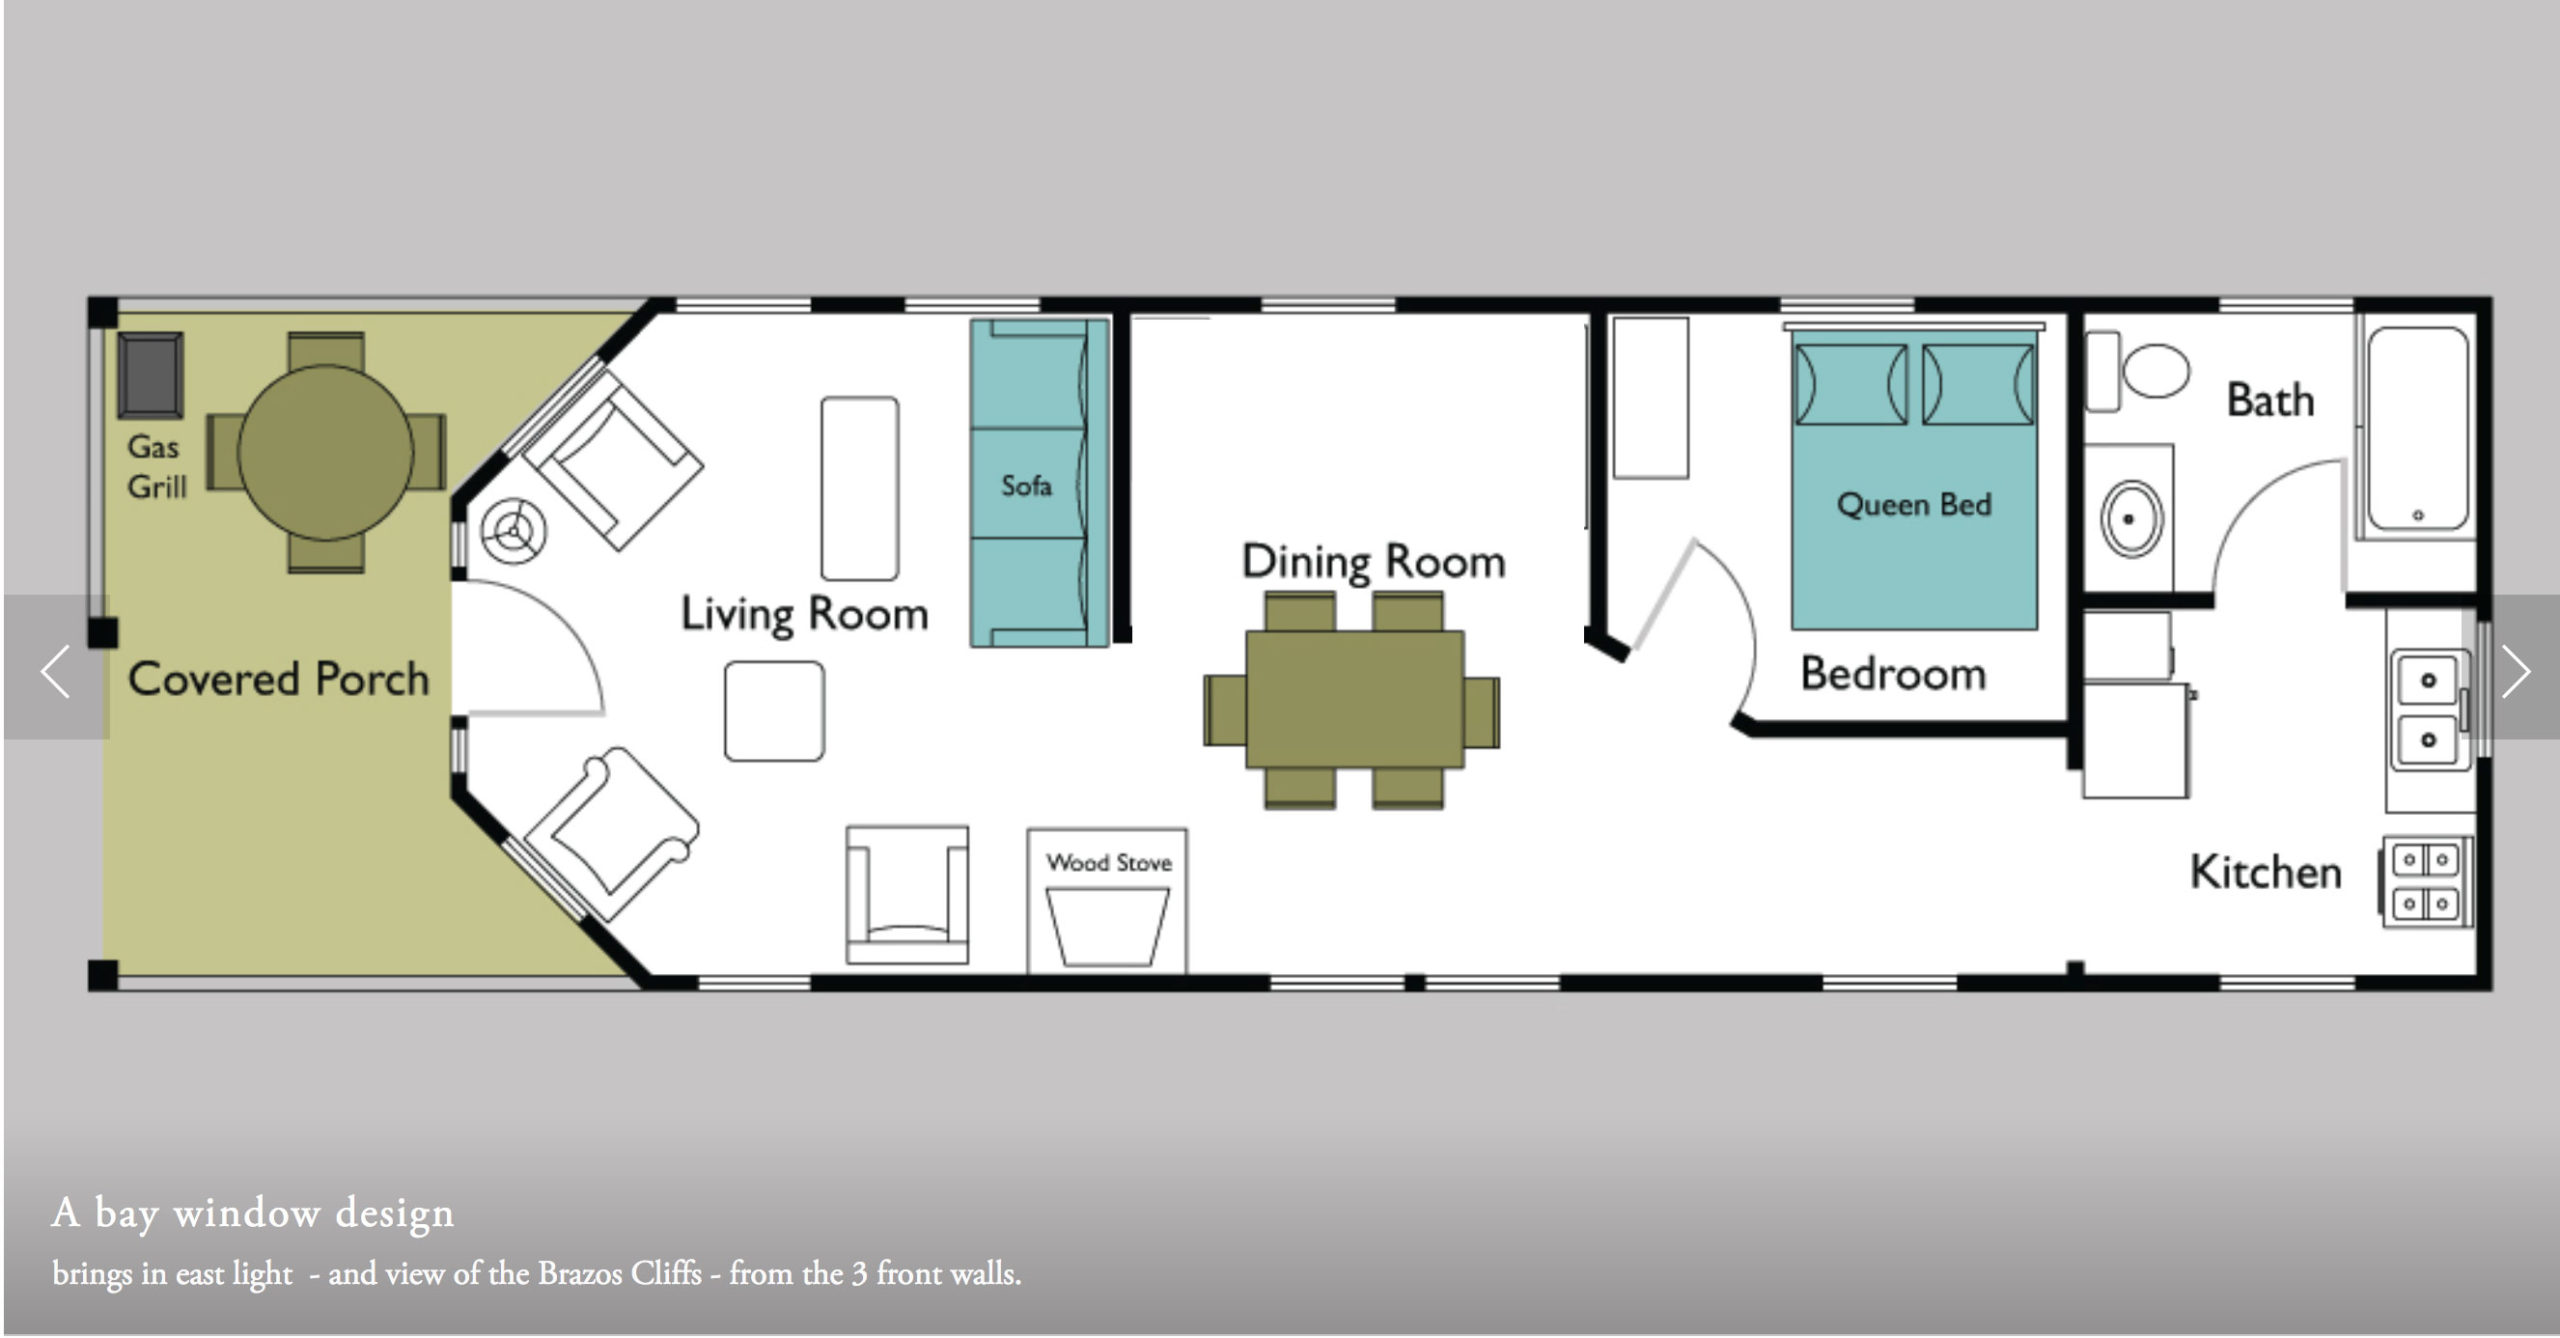 An architectural drawing of the the Tipton cabin floor plan